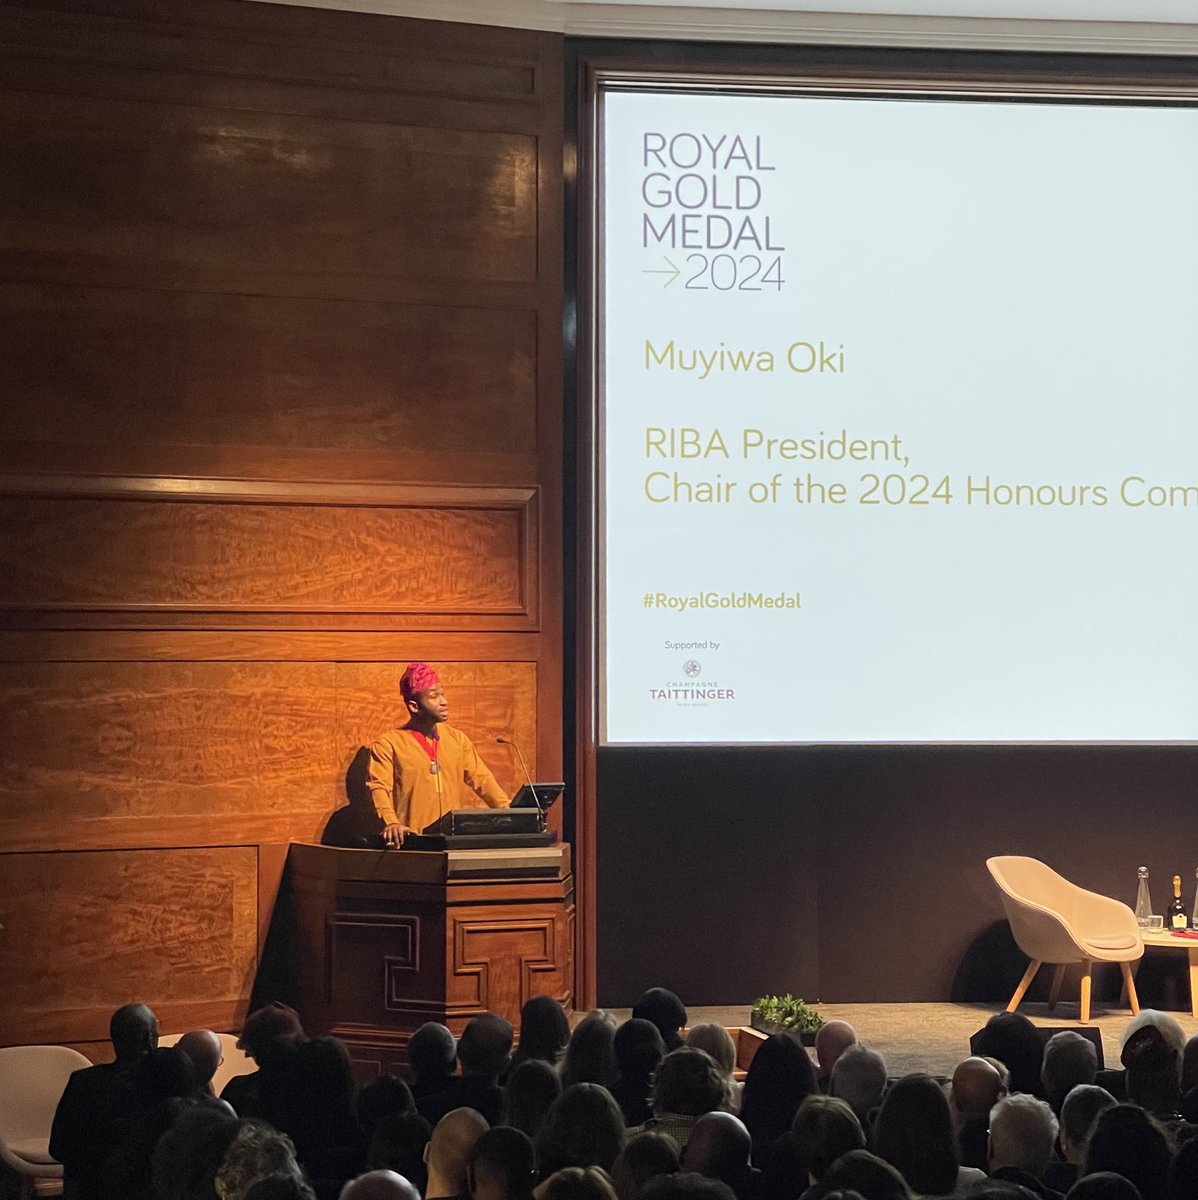 “Lesley has been an advocate for democratising architecture, making it accessible to all.” - @Muyiwa_Oki, RIBA President. #RoyalGoldMedal